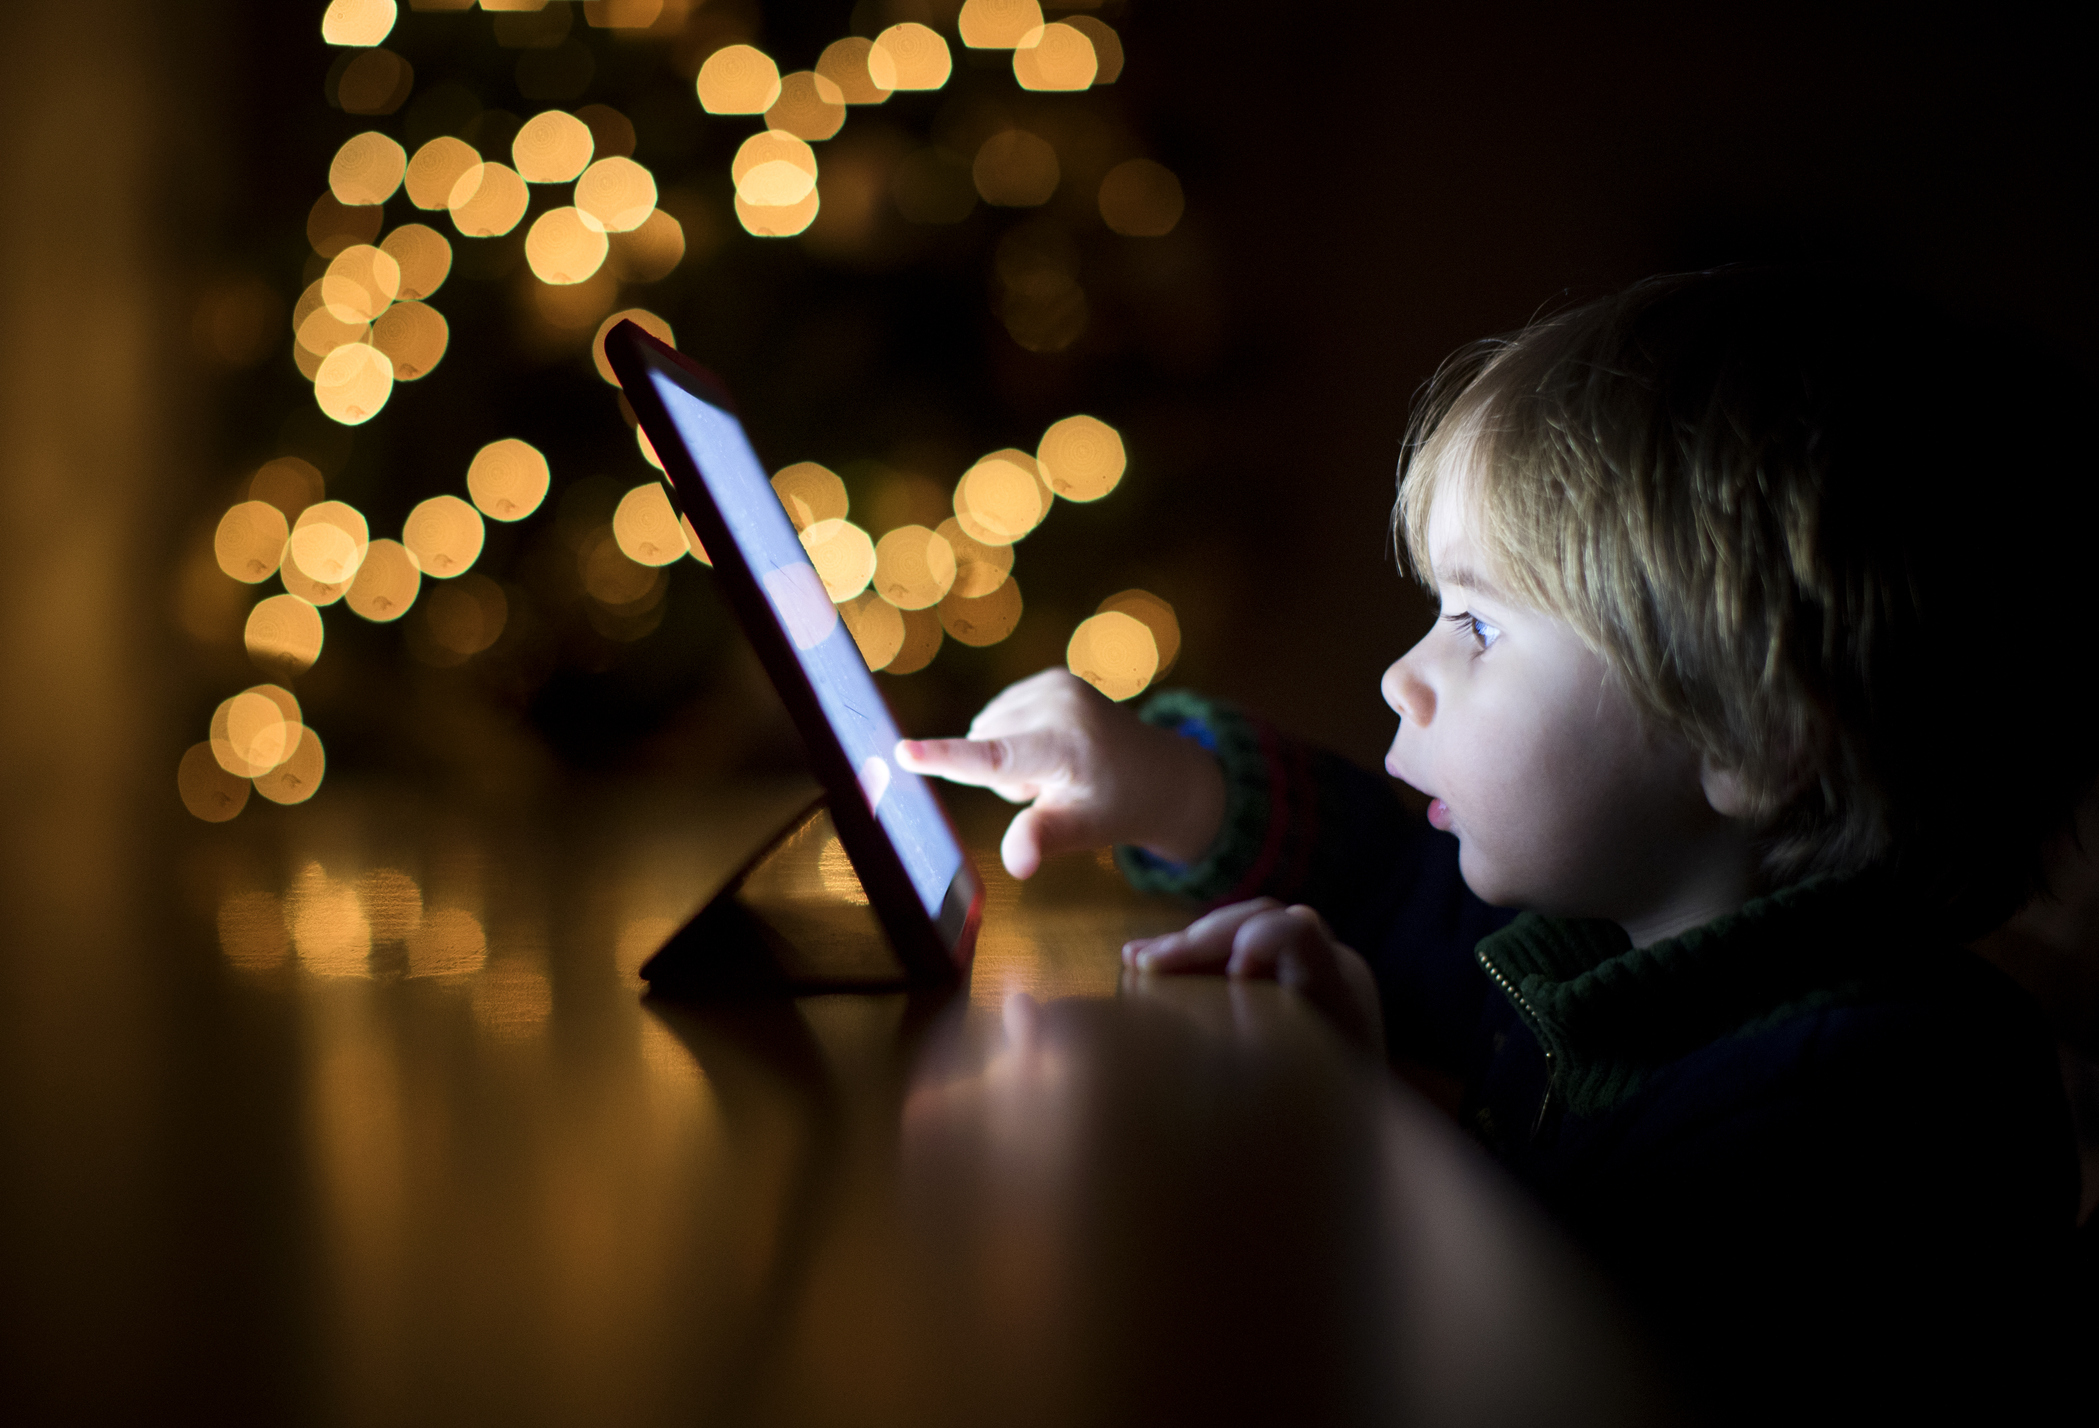 Children and Technology: Positive and Negative Effects